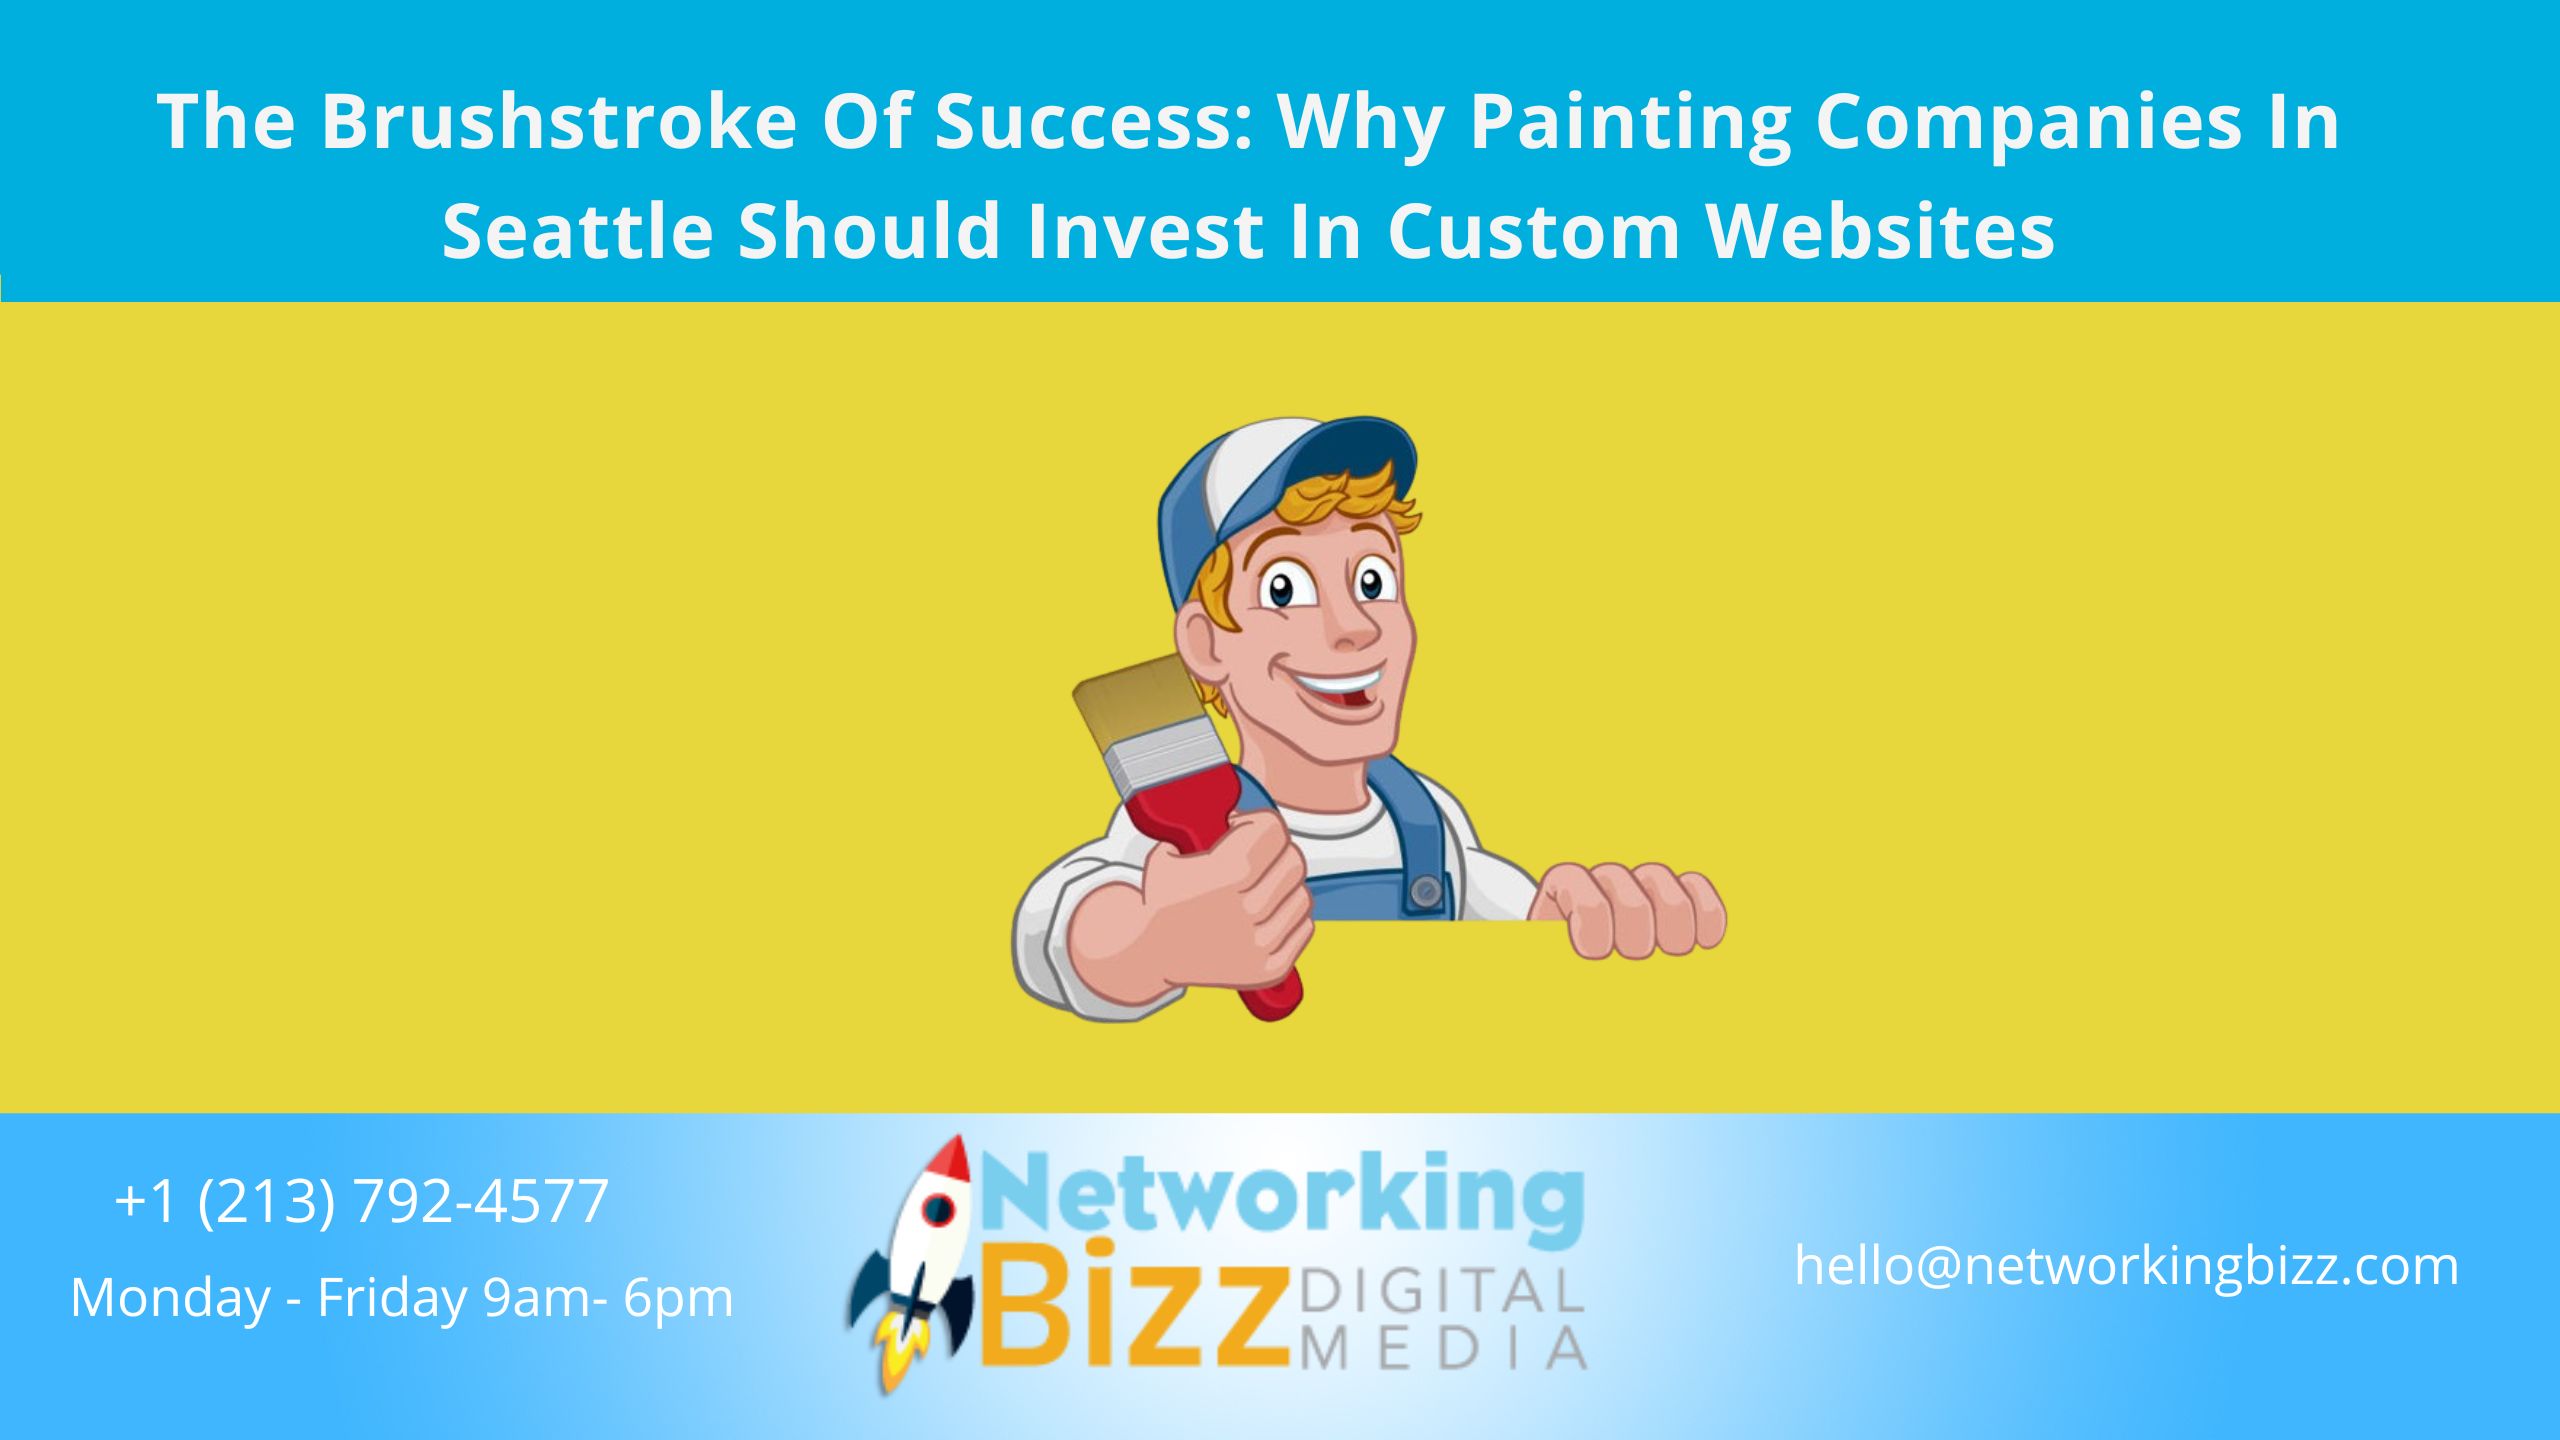 The Brushstroke Of Success: Why Painting Companies In Seattle Should Invest In Custom Websites